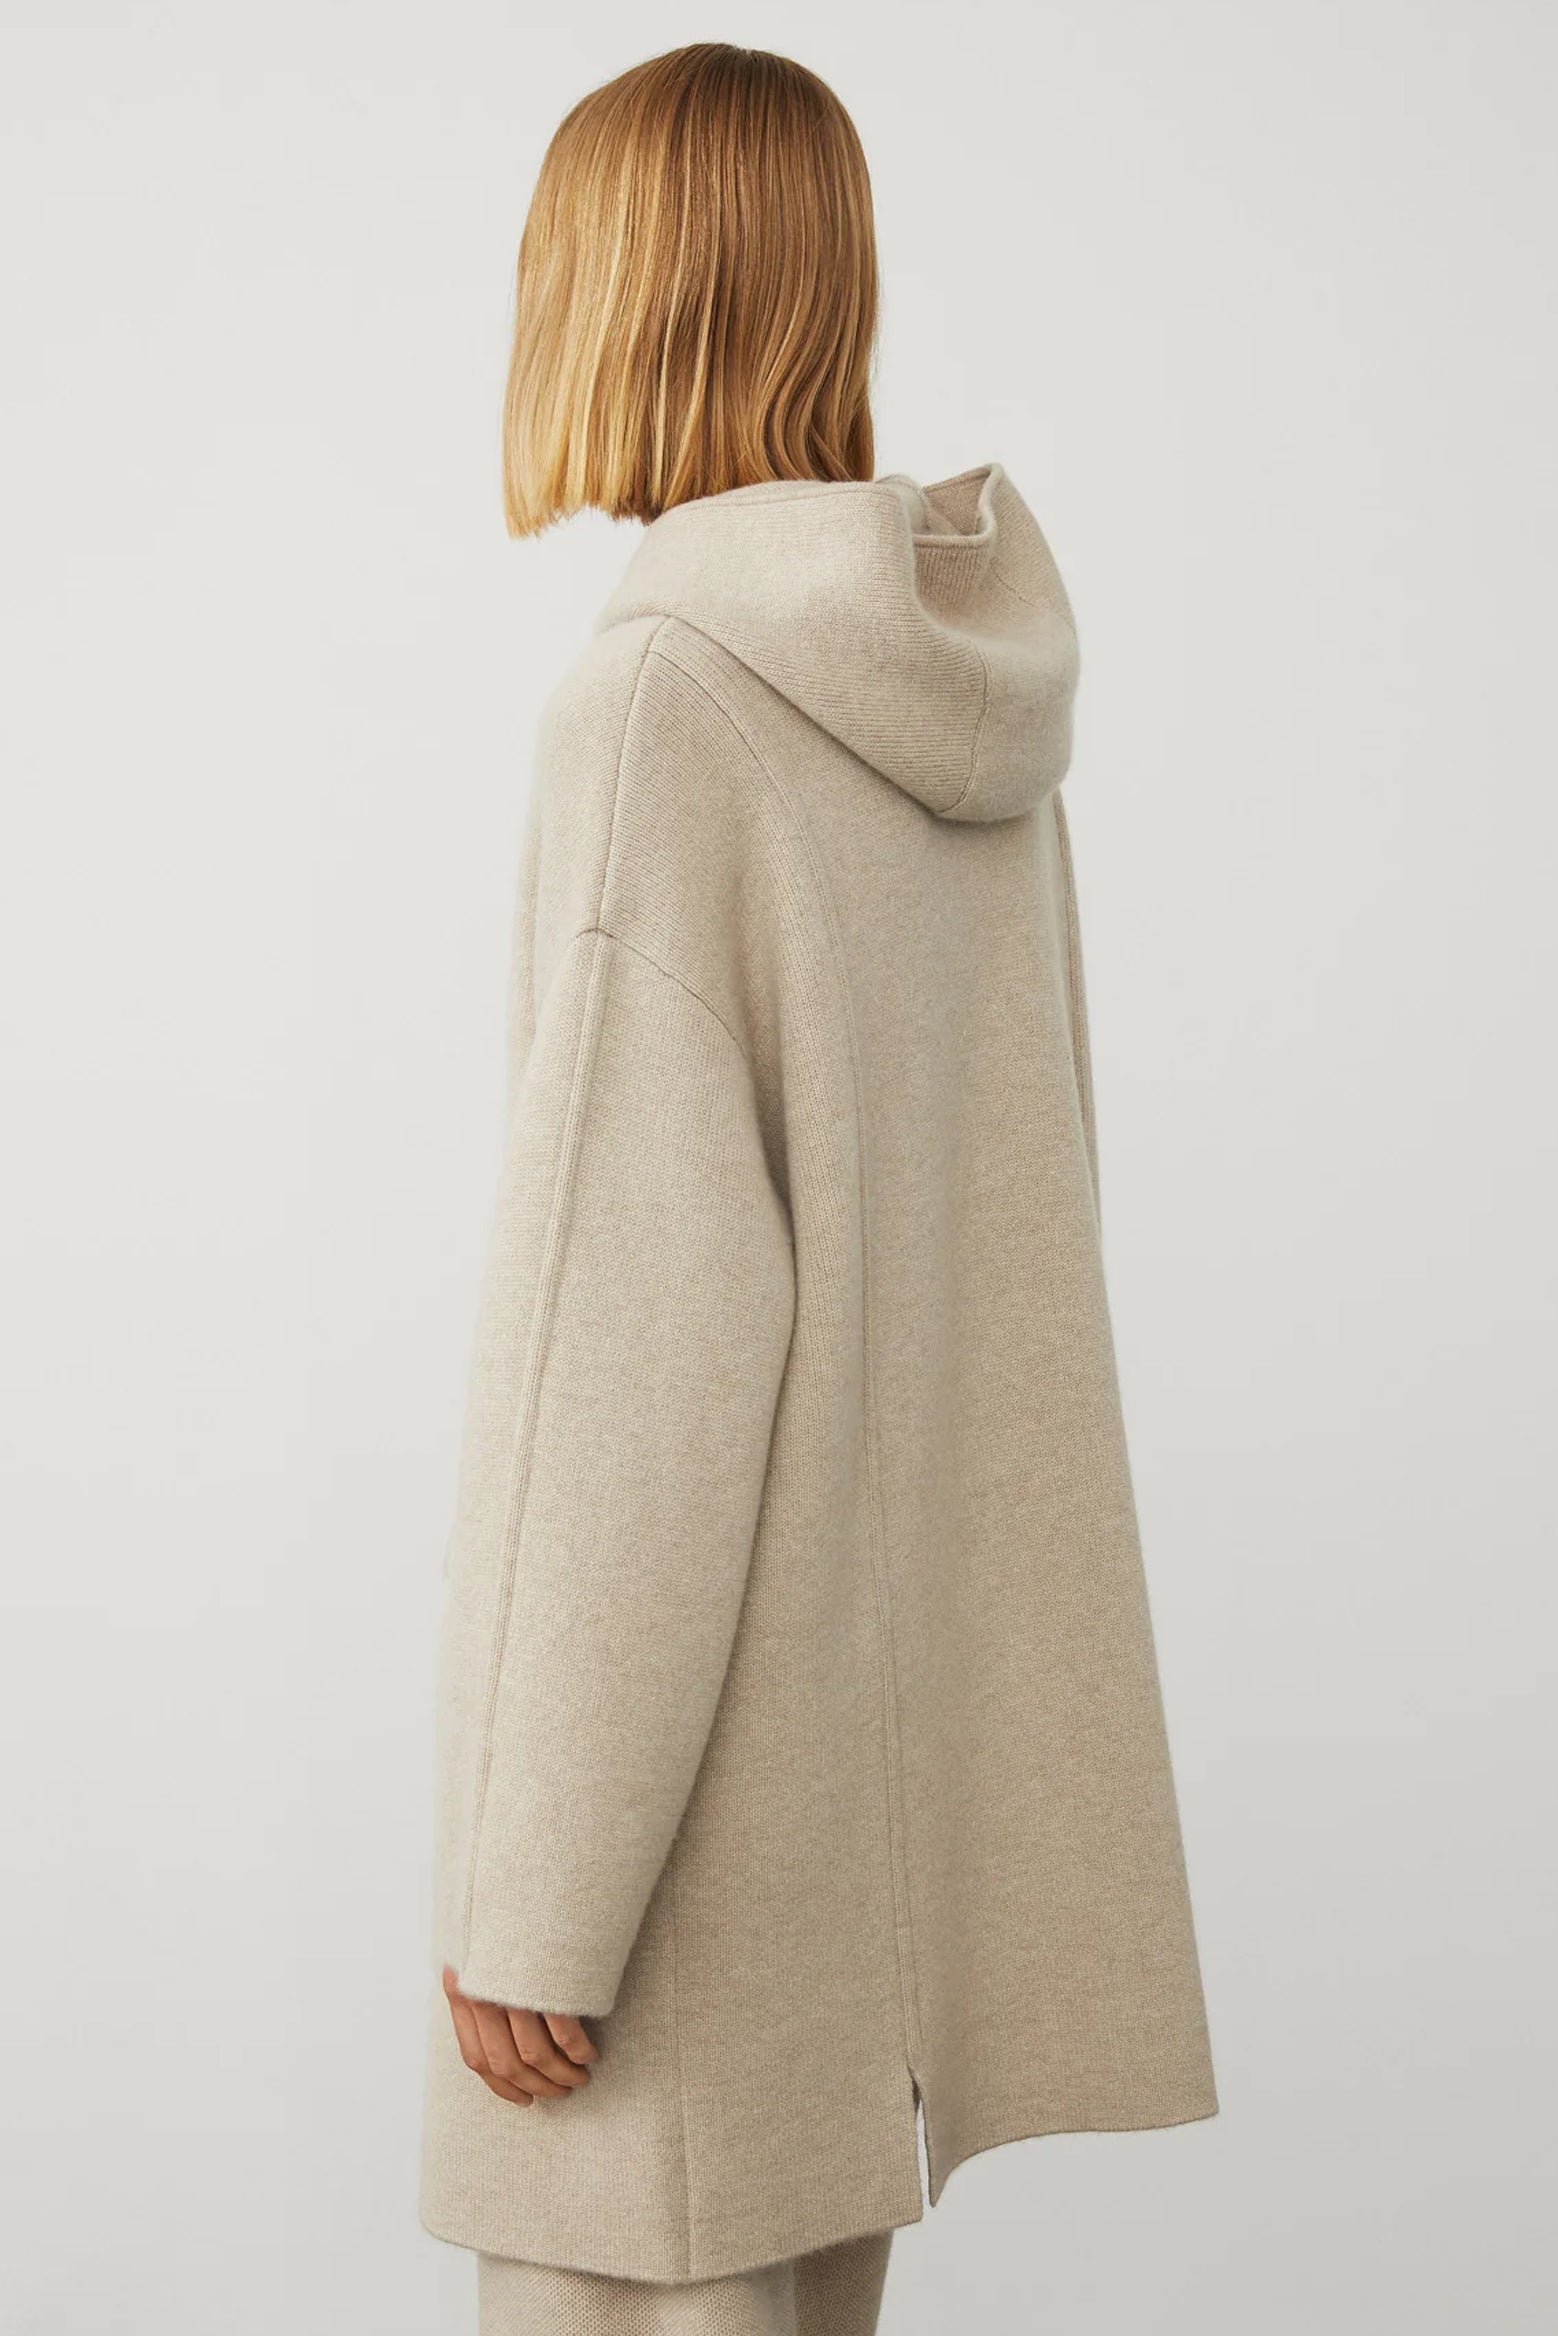 Lisa Yang Fabrizia Cardigan Coat in Sand available at The New Trend Australia.